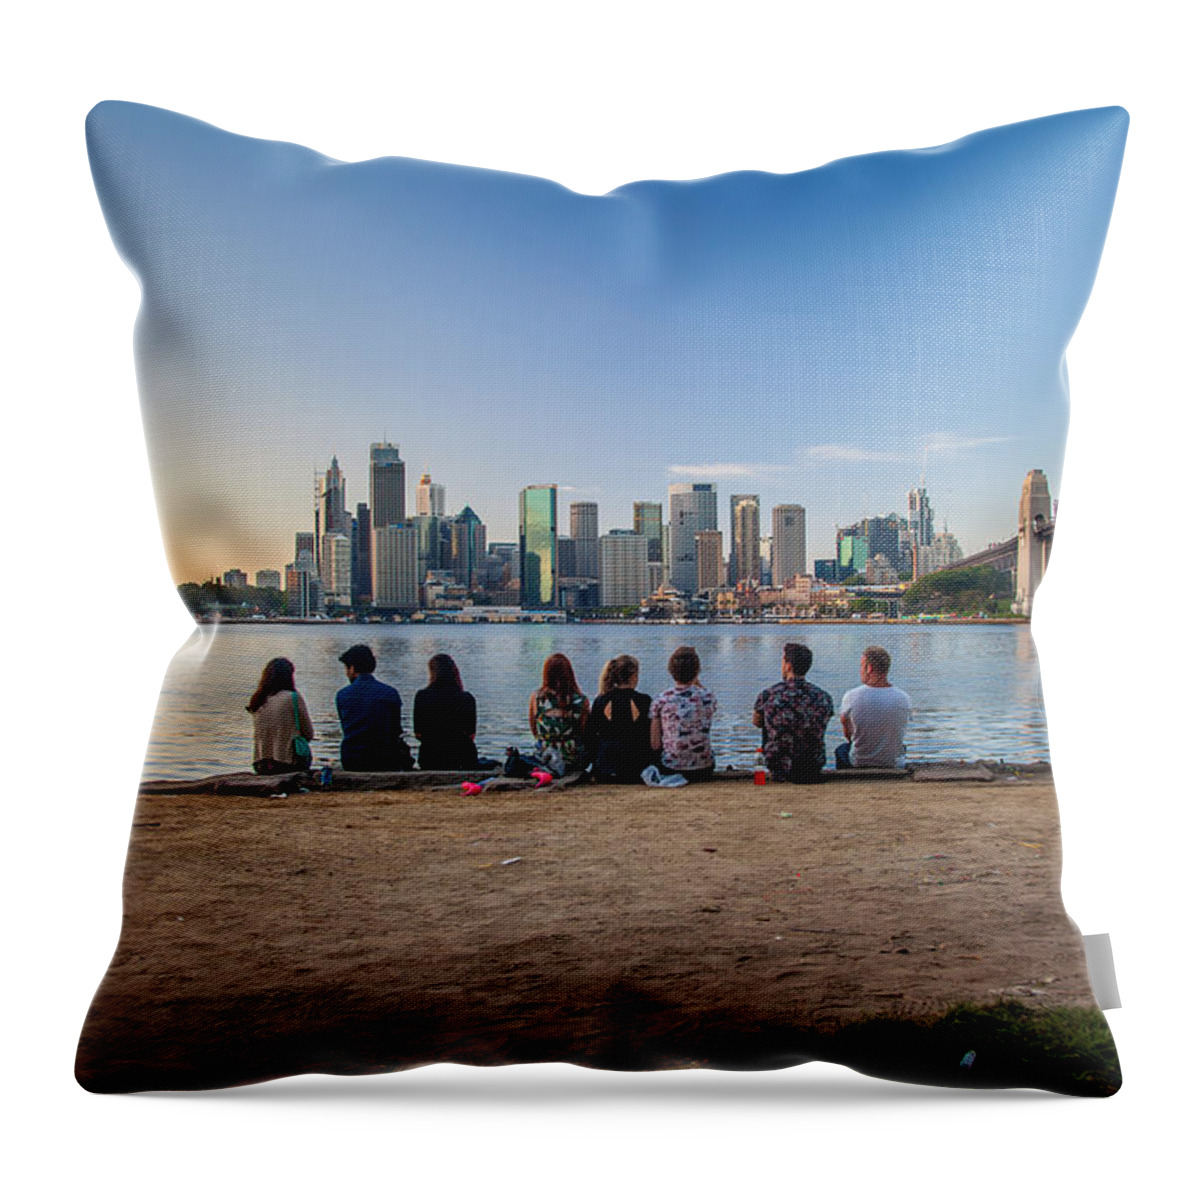 Sydney Throw Pillow featuring the photograph The Morning After by Az Jackson